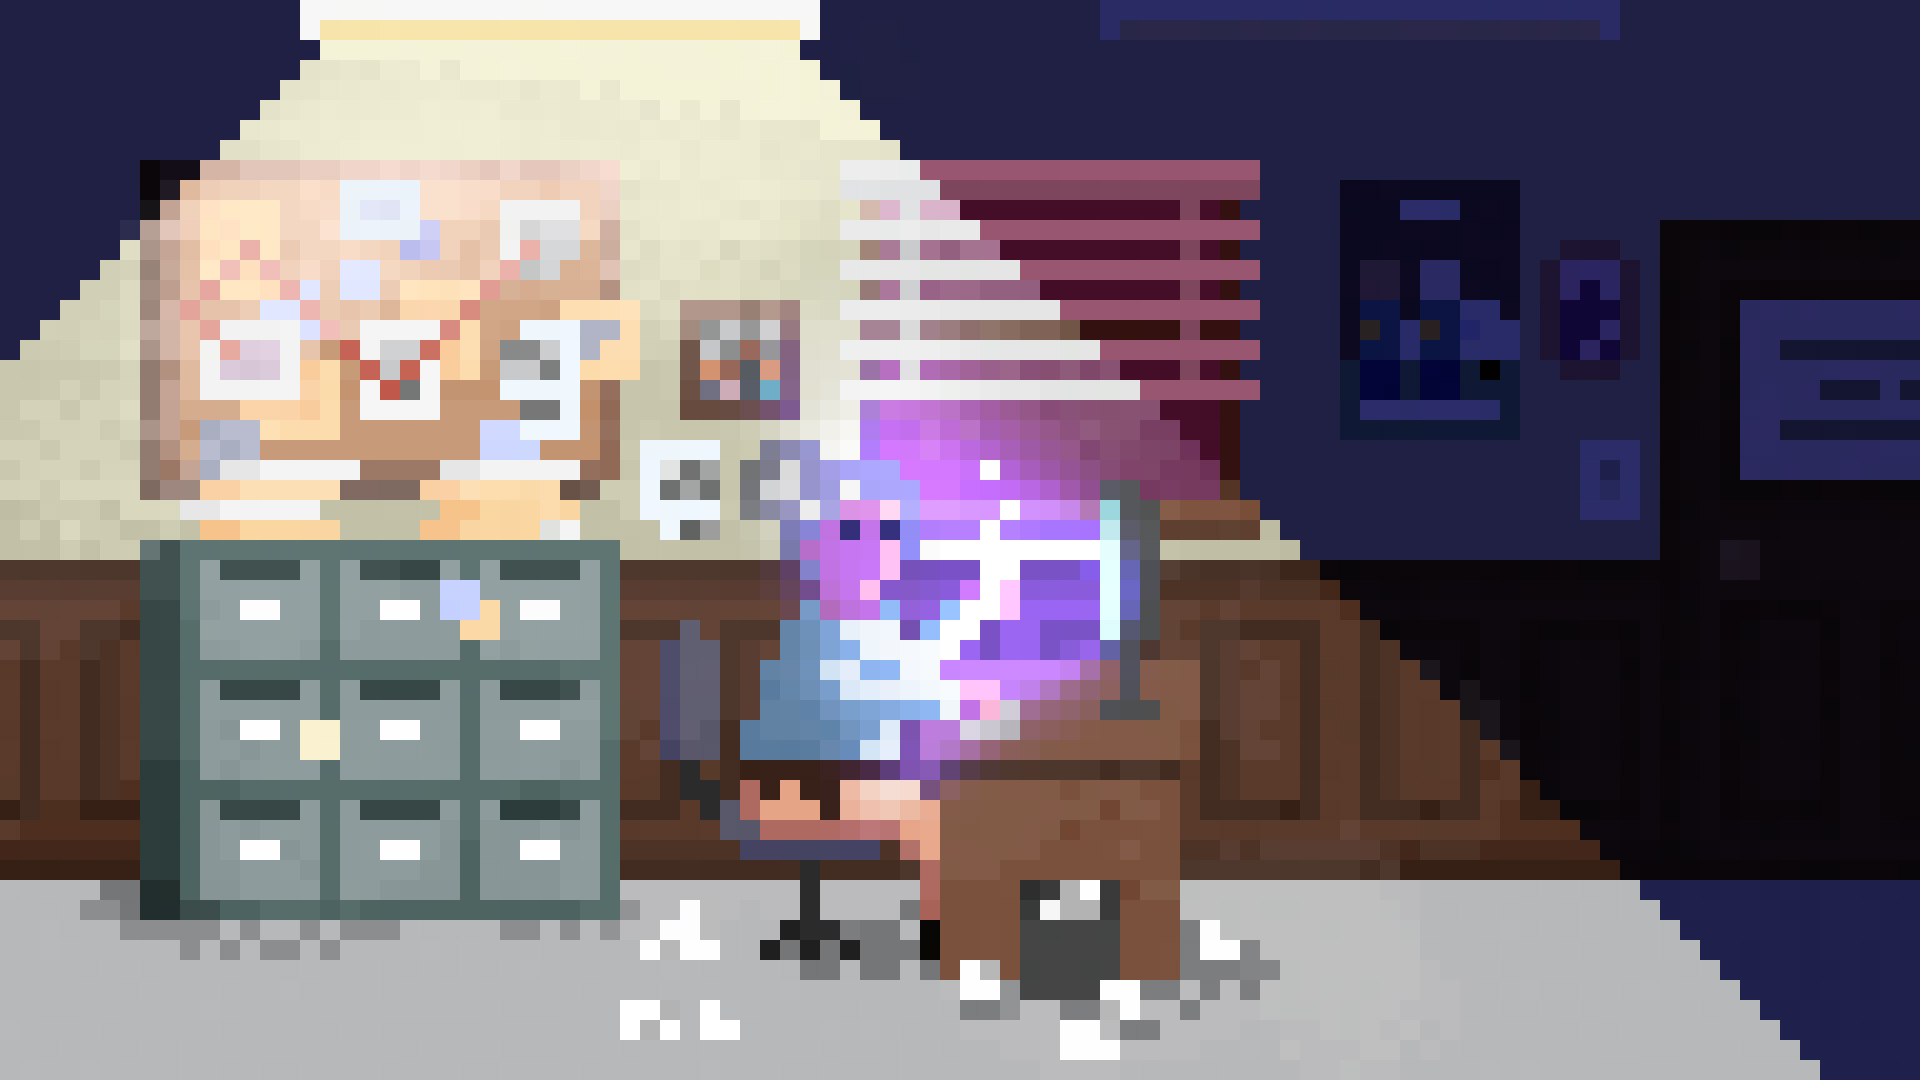 Pixel art of dark-skinned female detective sitting at a desk, illuminated by her computer screen and an overhead light.